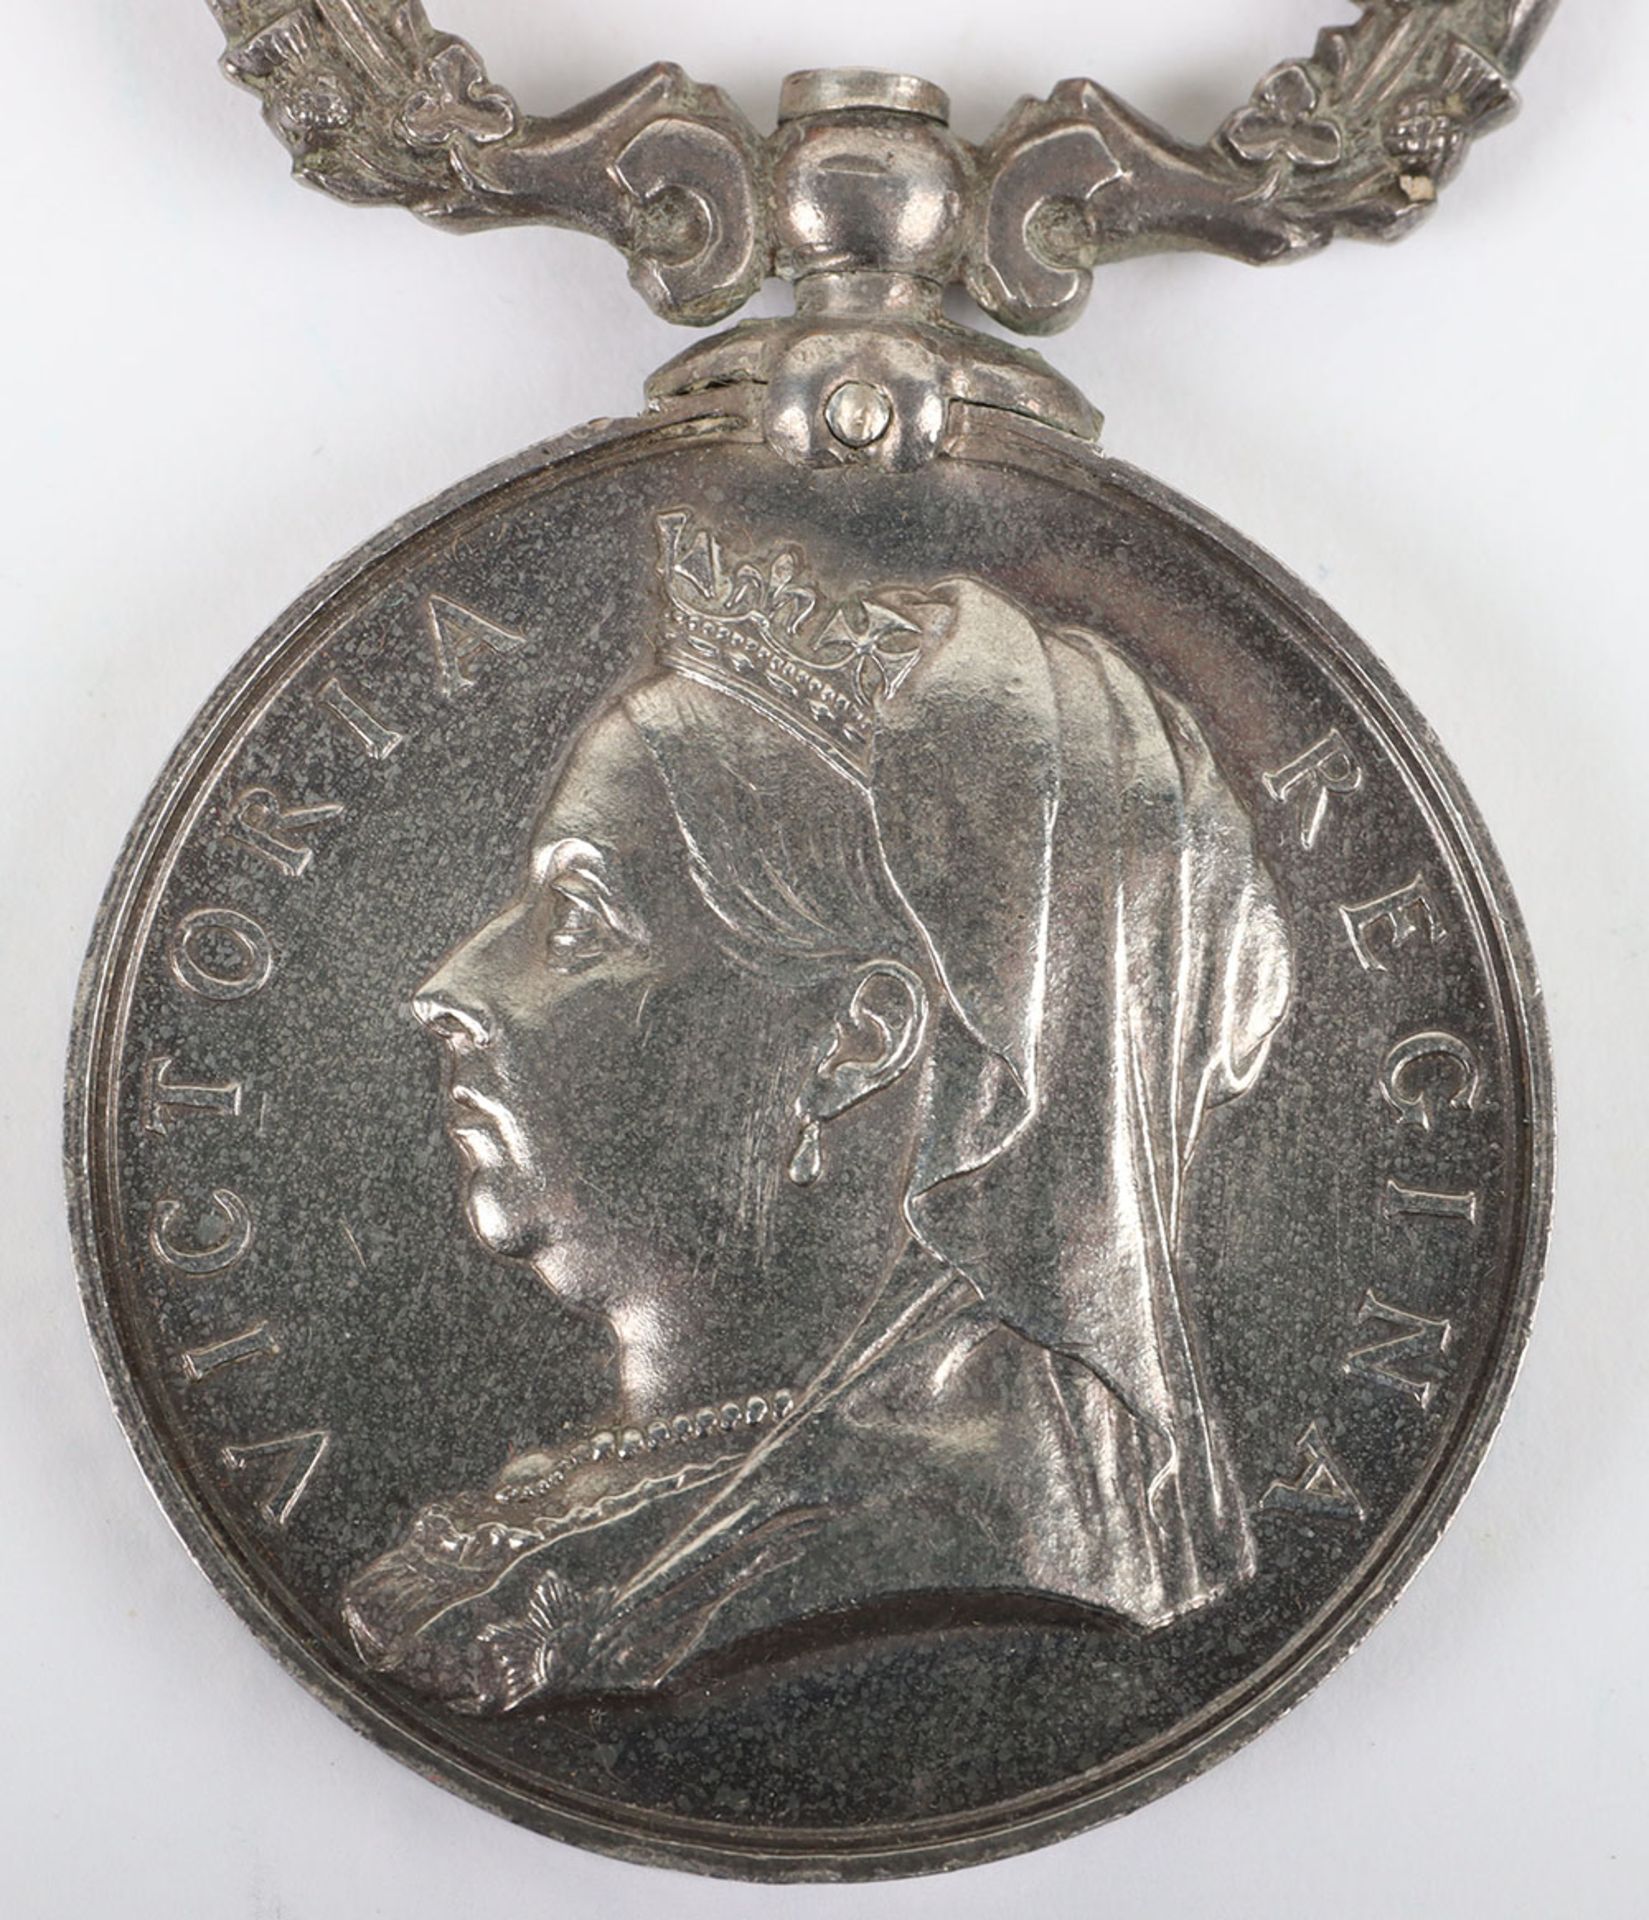 British South Africa Company Medal 1890-97 - Image 2 of 6